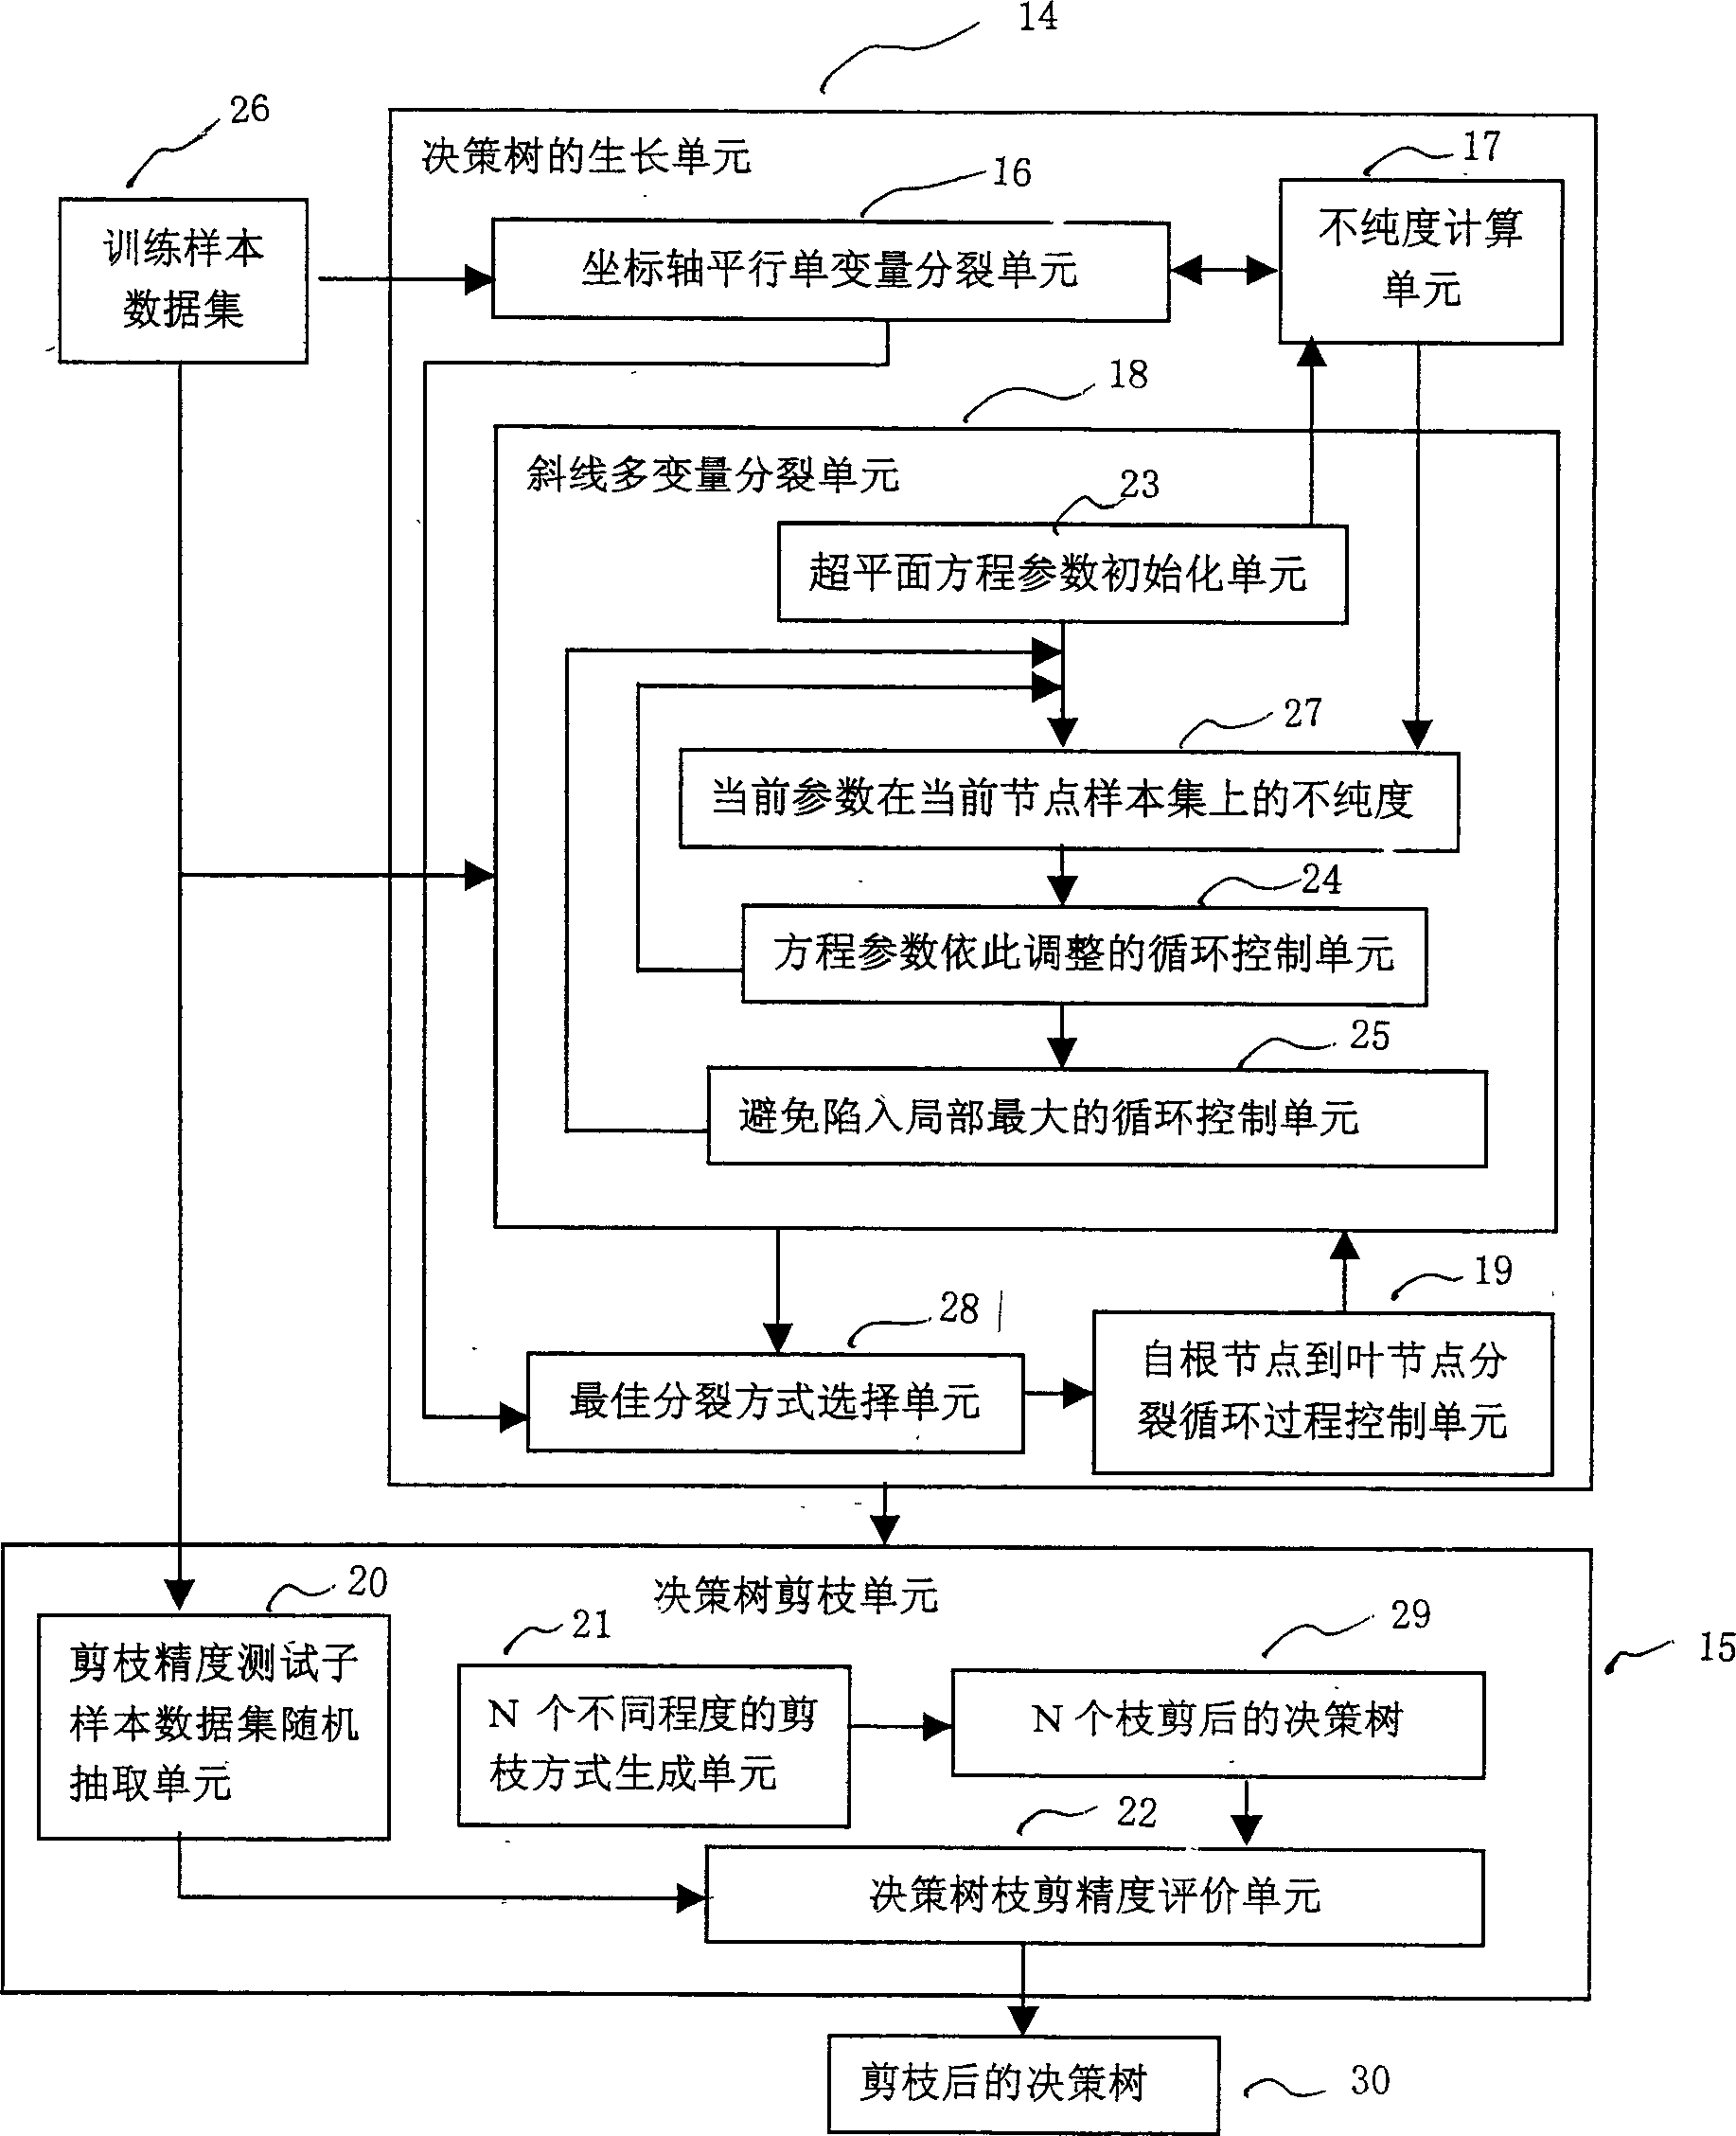 Remote sensing image decision tree classification method and system